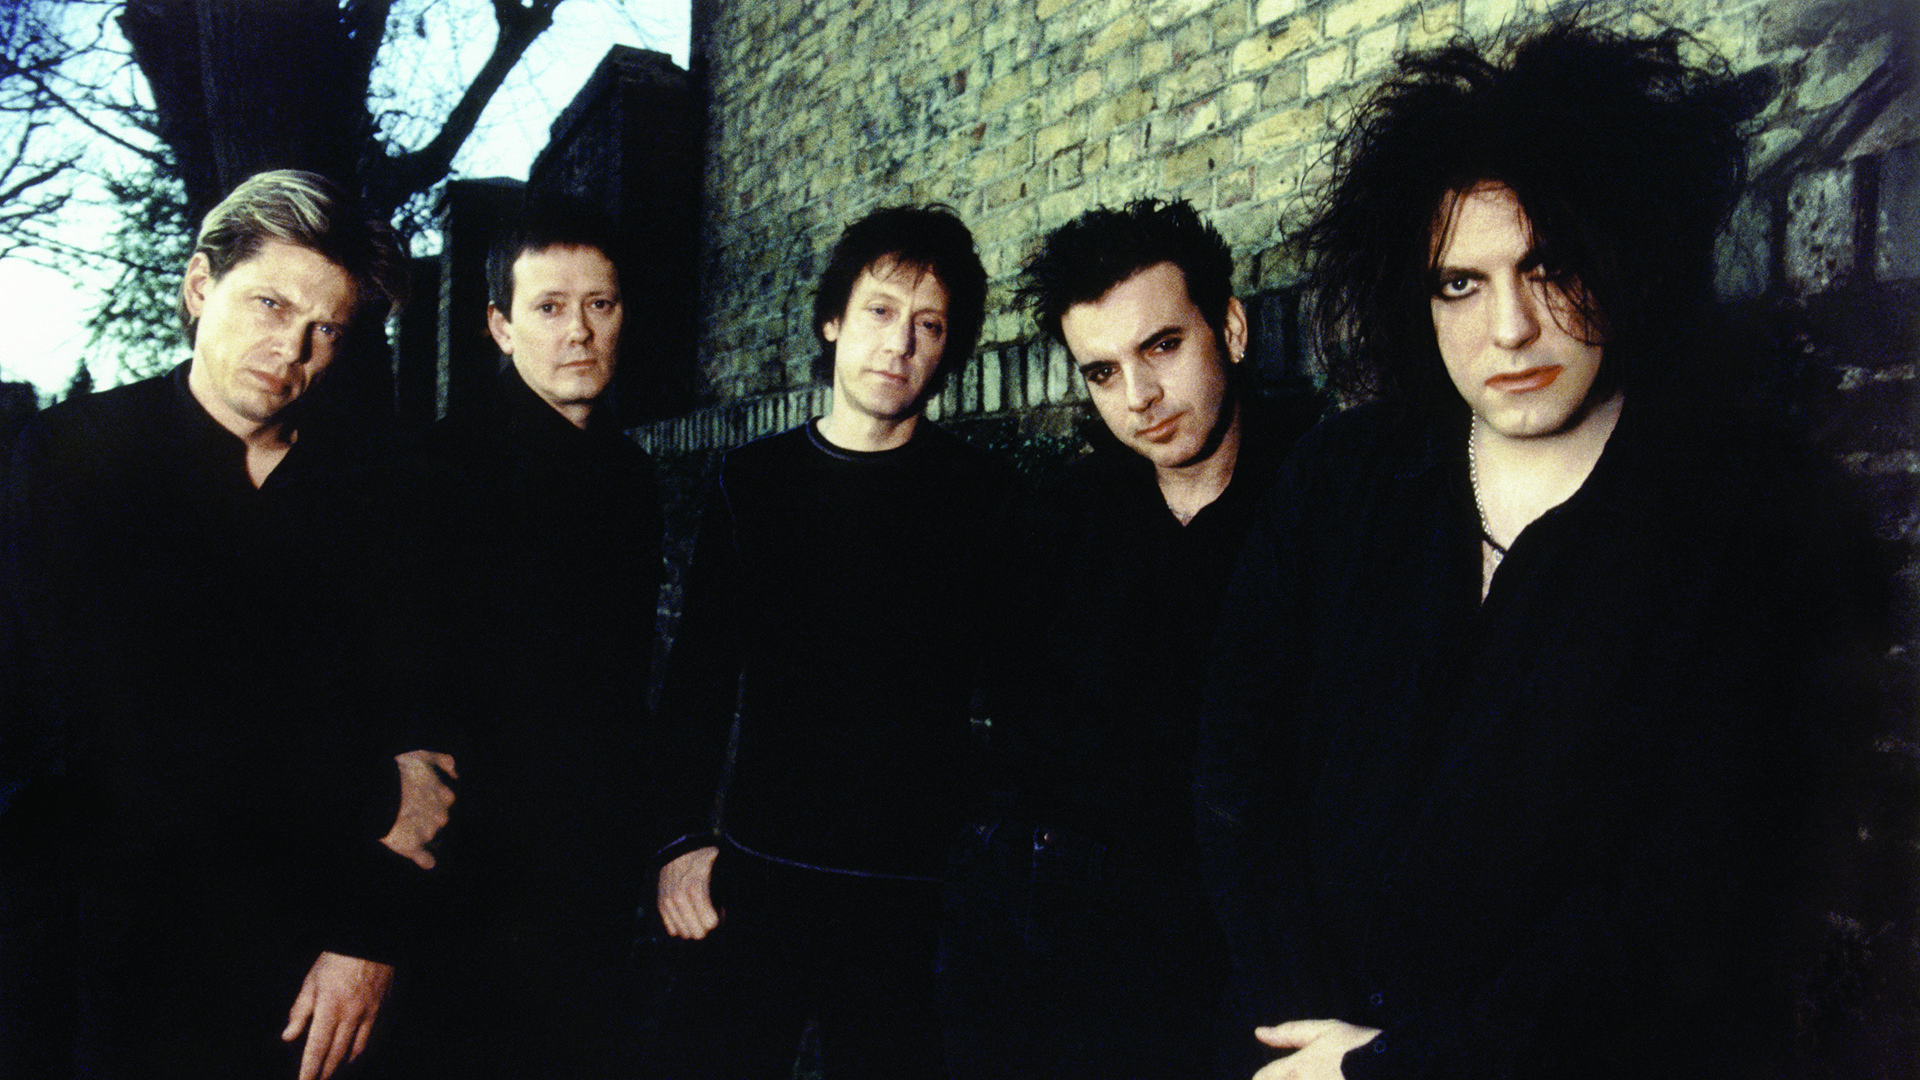 Roger O'Donnell, Simon Gallup, Band name meaning, The Cure, 1920x1080 Full HD Desktop